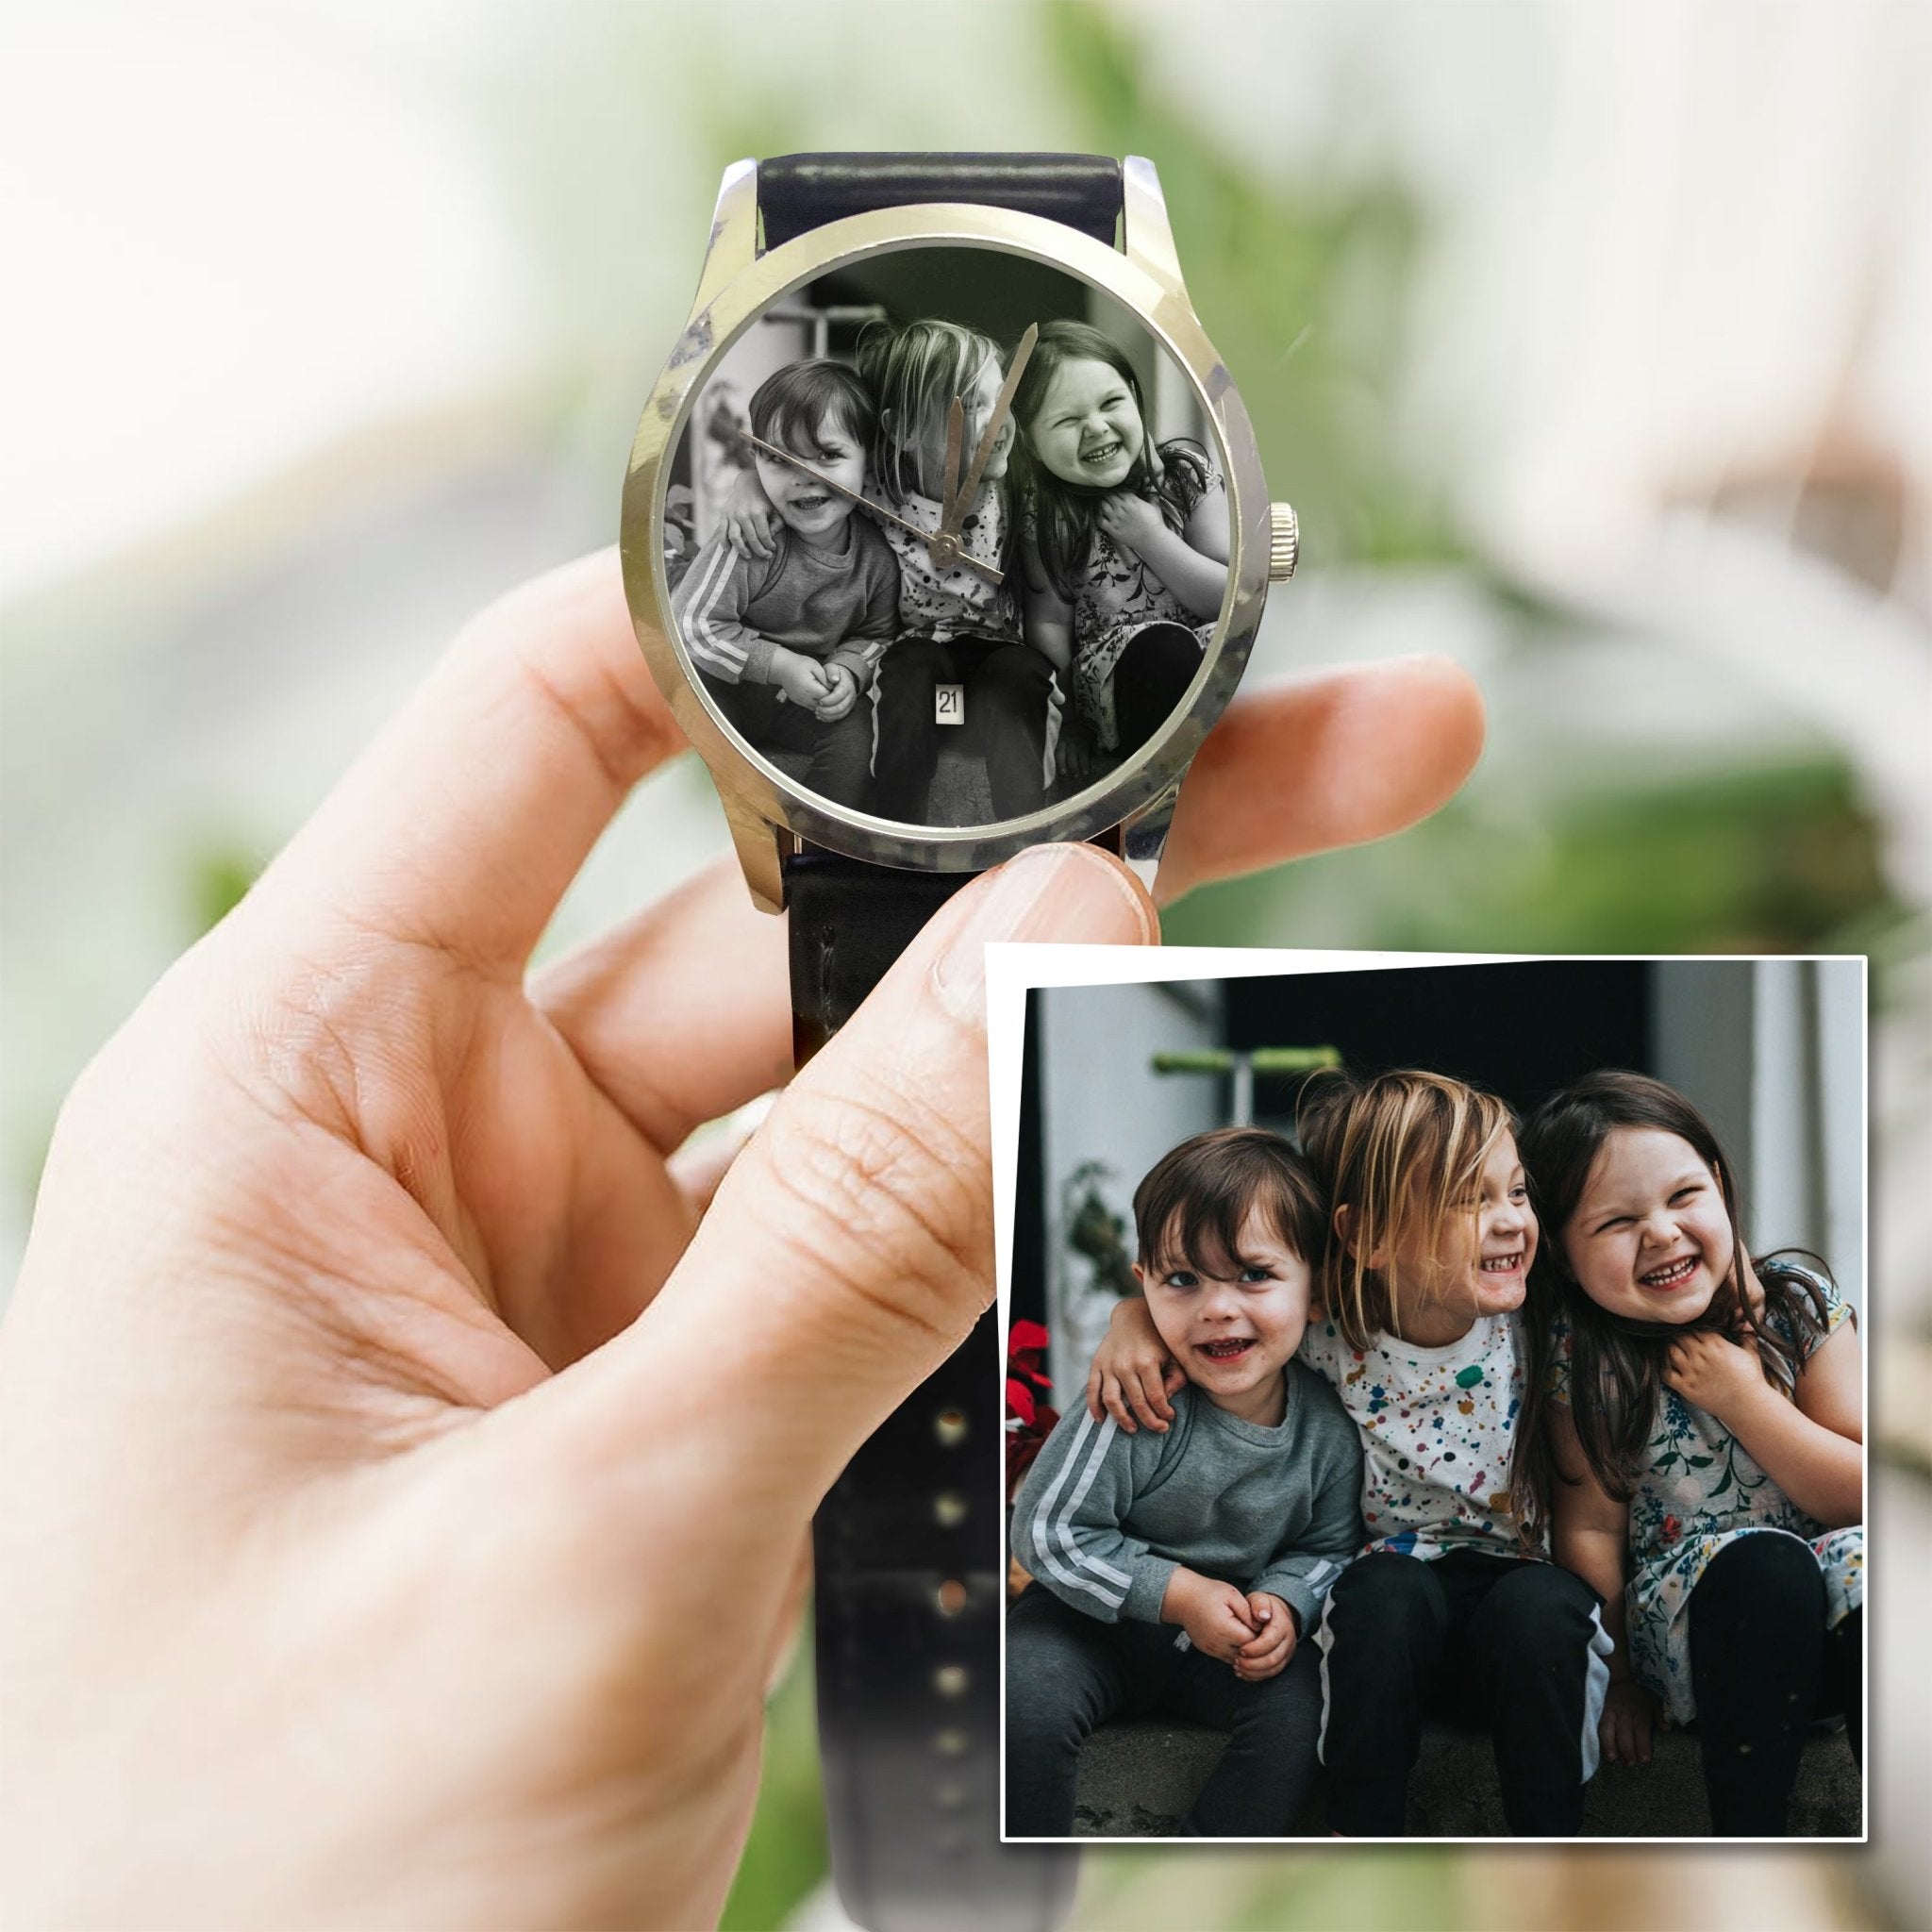 Gift From Grandkids For Fathers Day, Grandfather Gift For Birthday, Grandad Thoughtful Present Watch - UniquePrintsStore